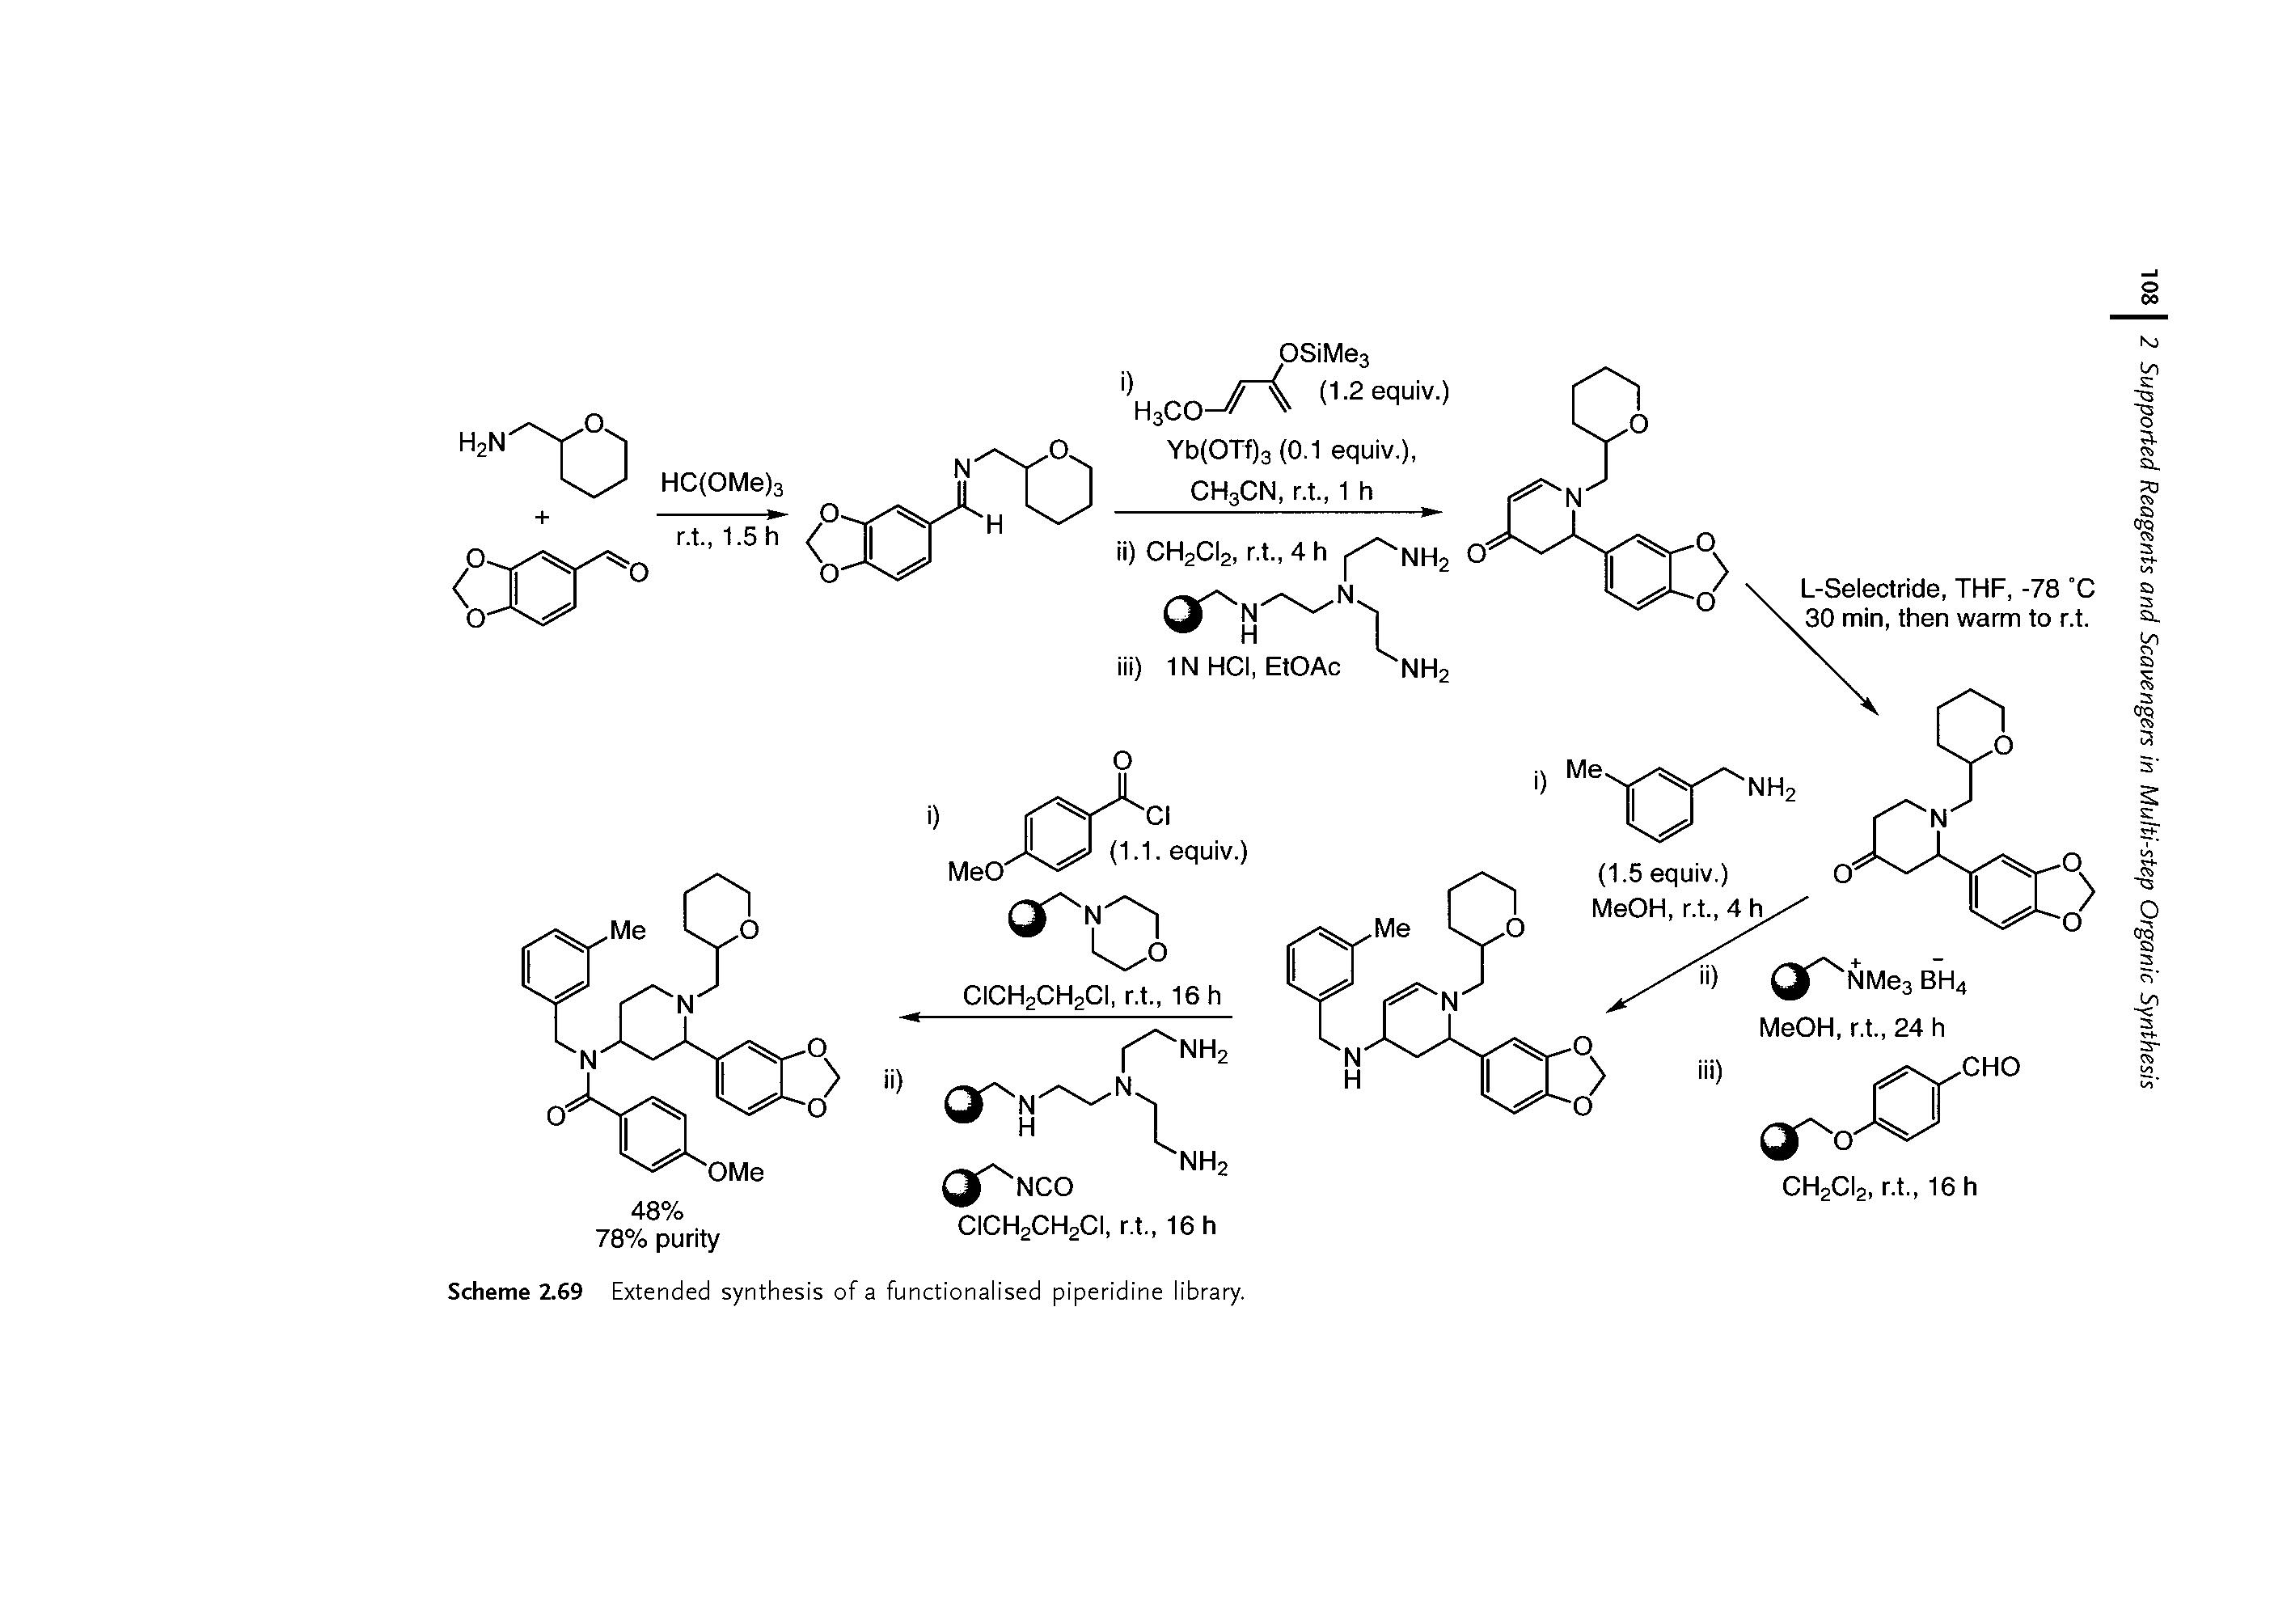 Scheme 2.69 Extended synthesis of a functionalised piperidine library.